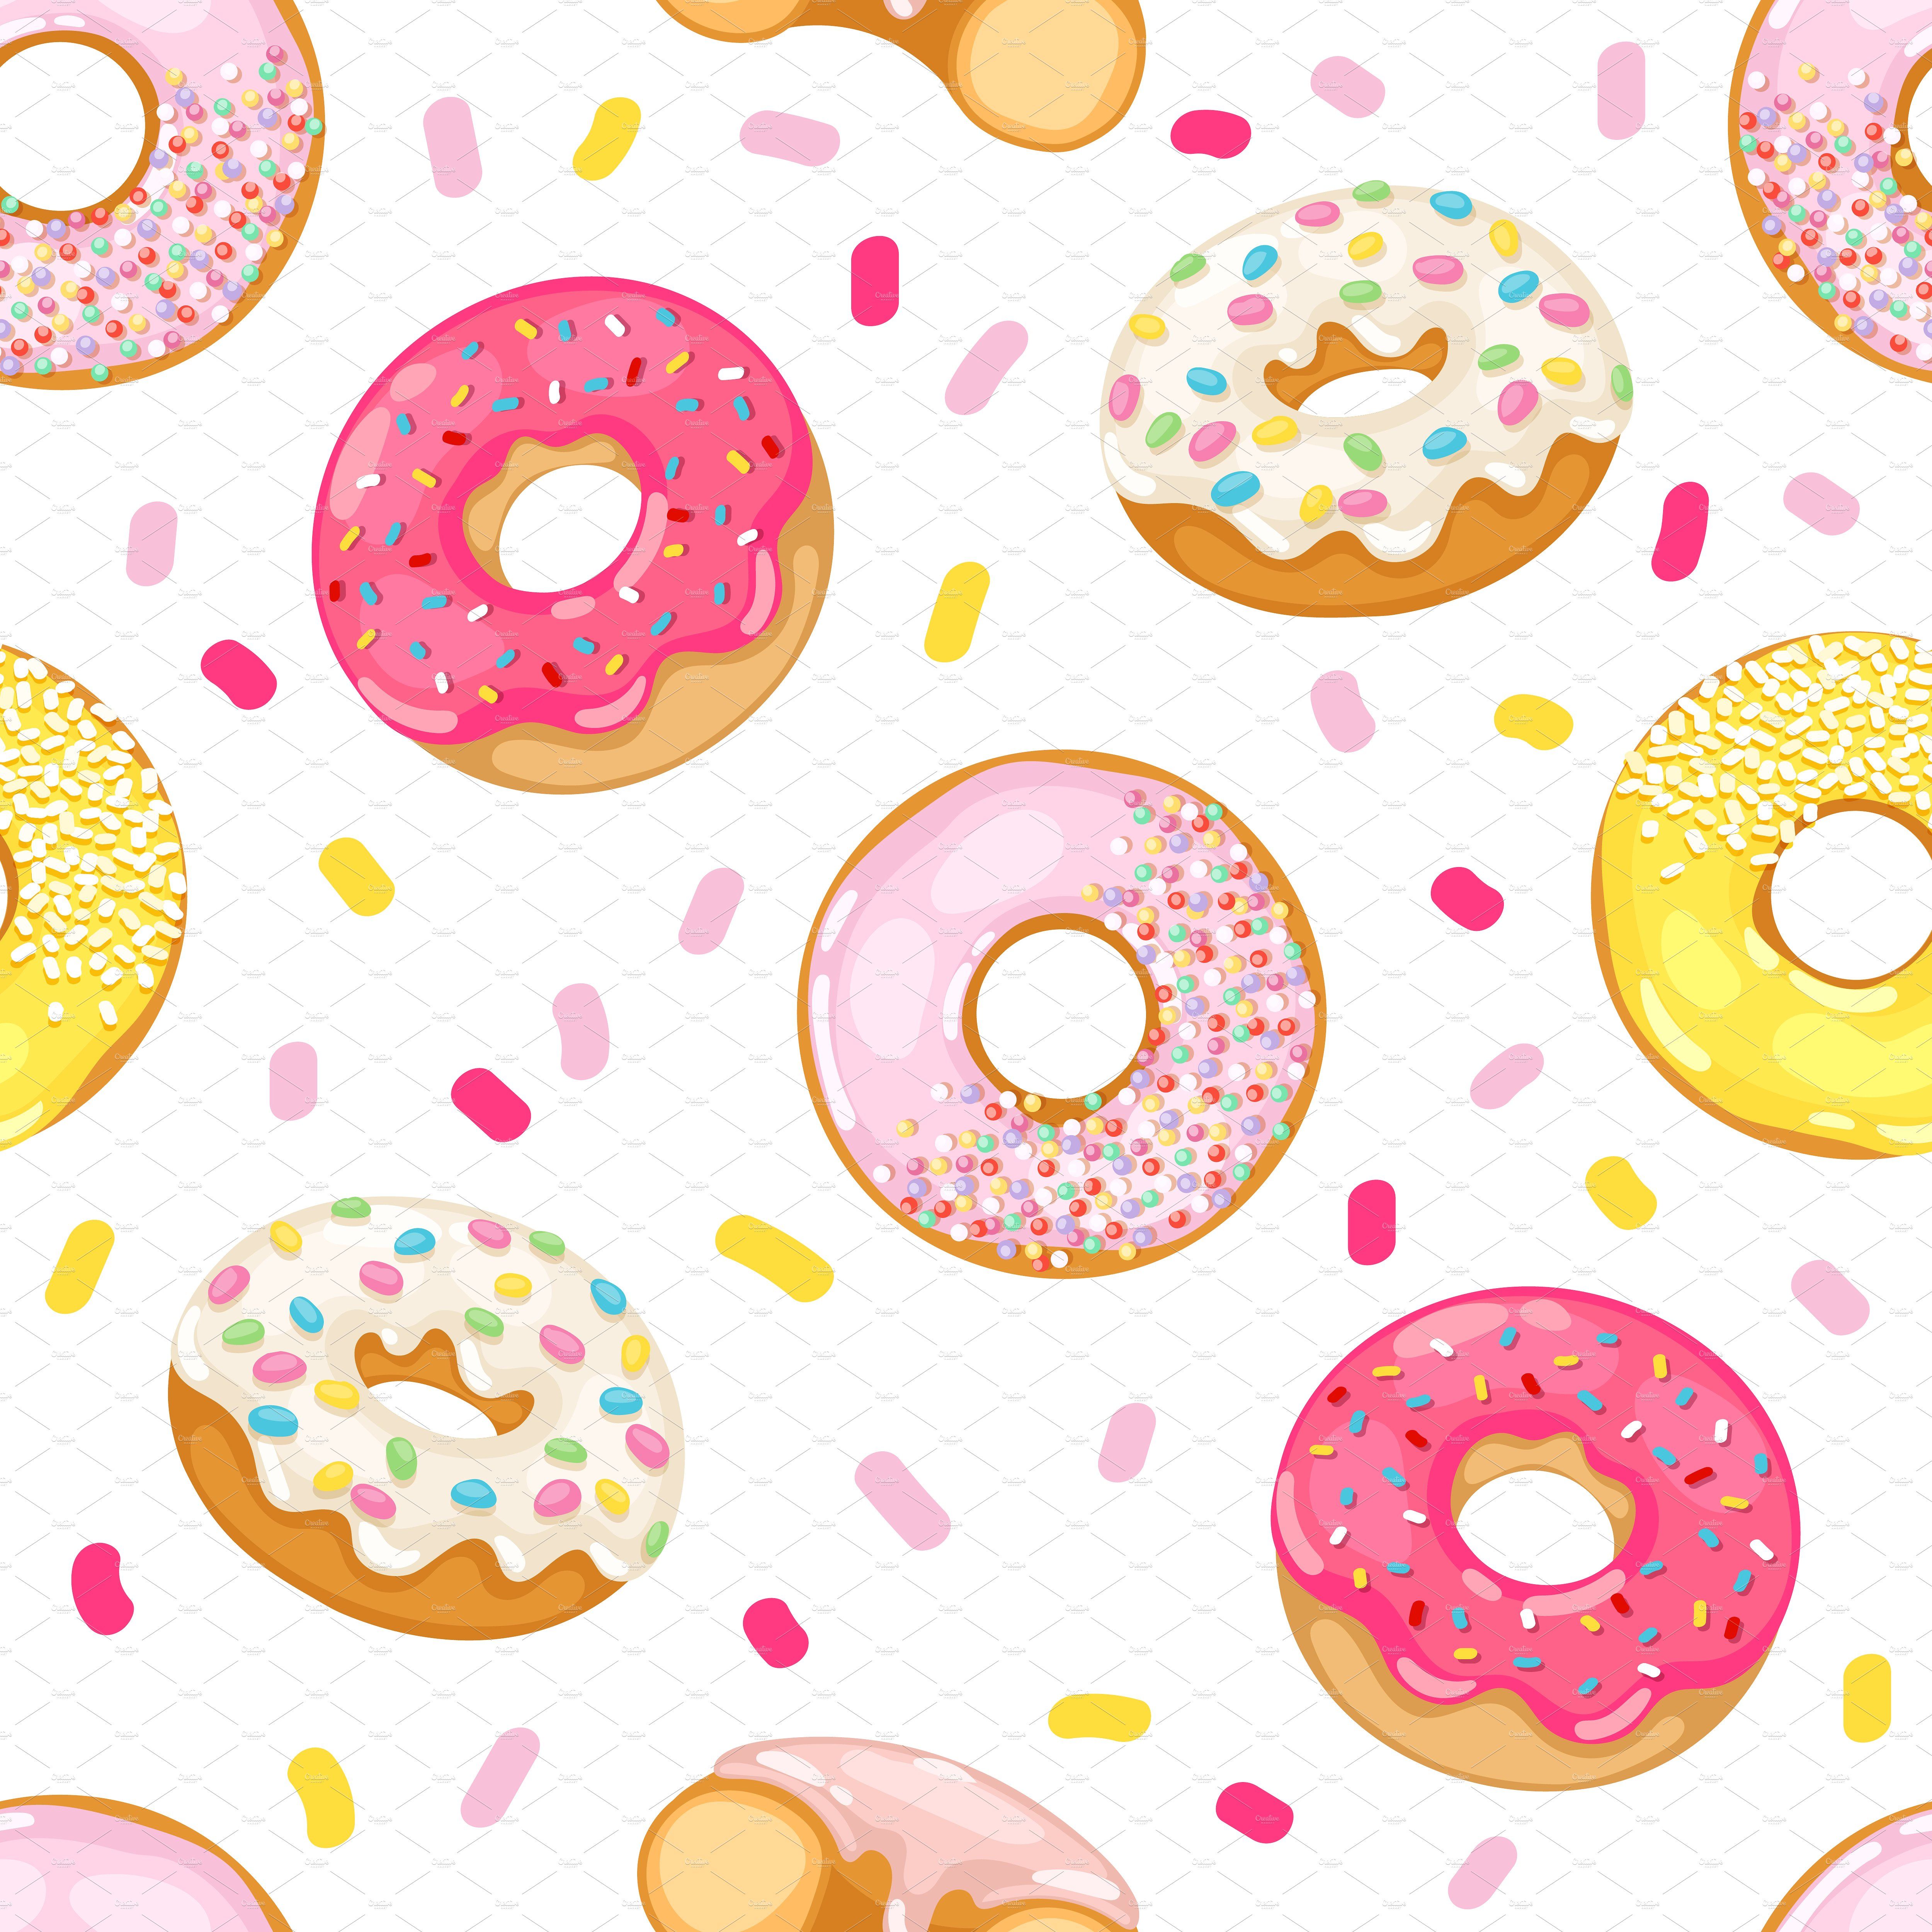 Colorful cute donut wallpapers